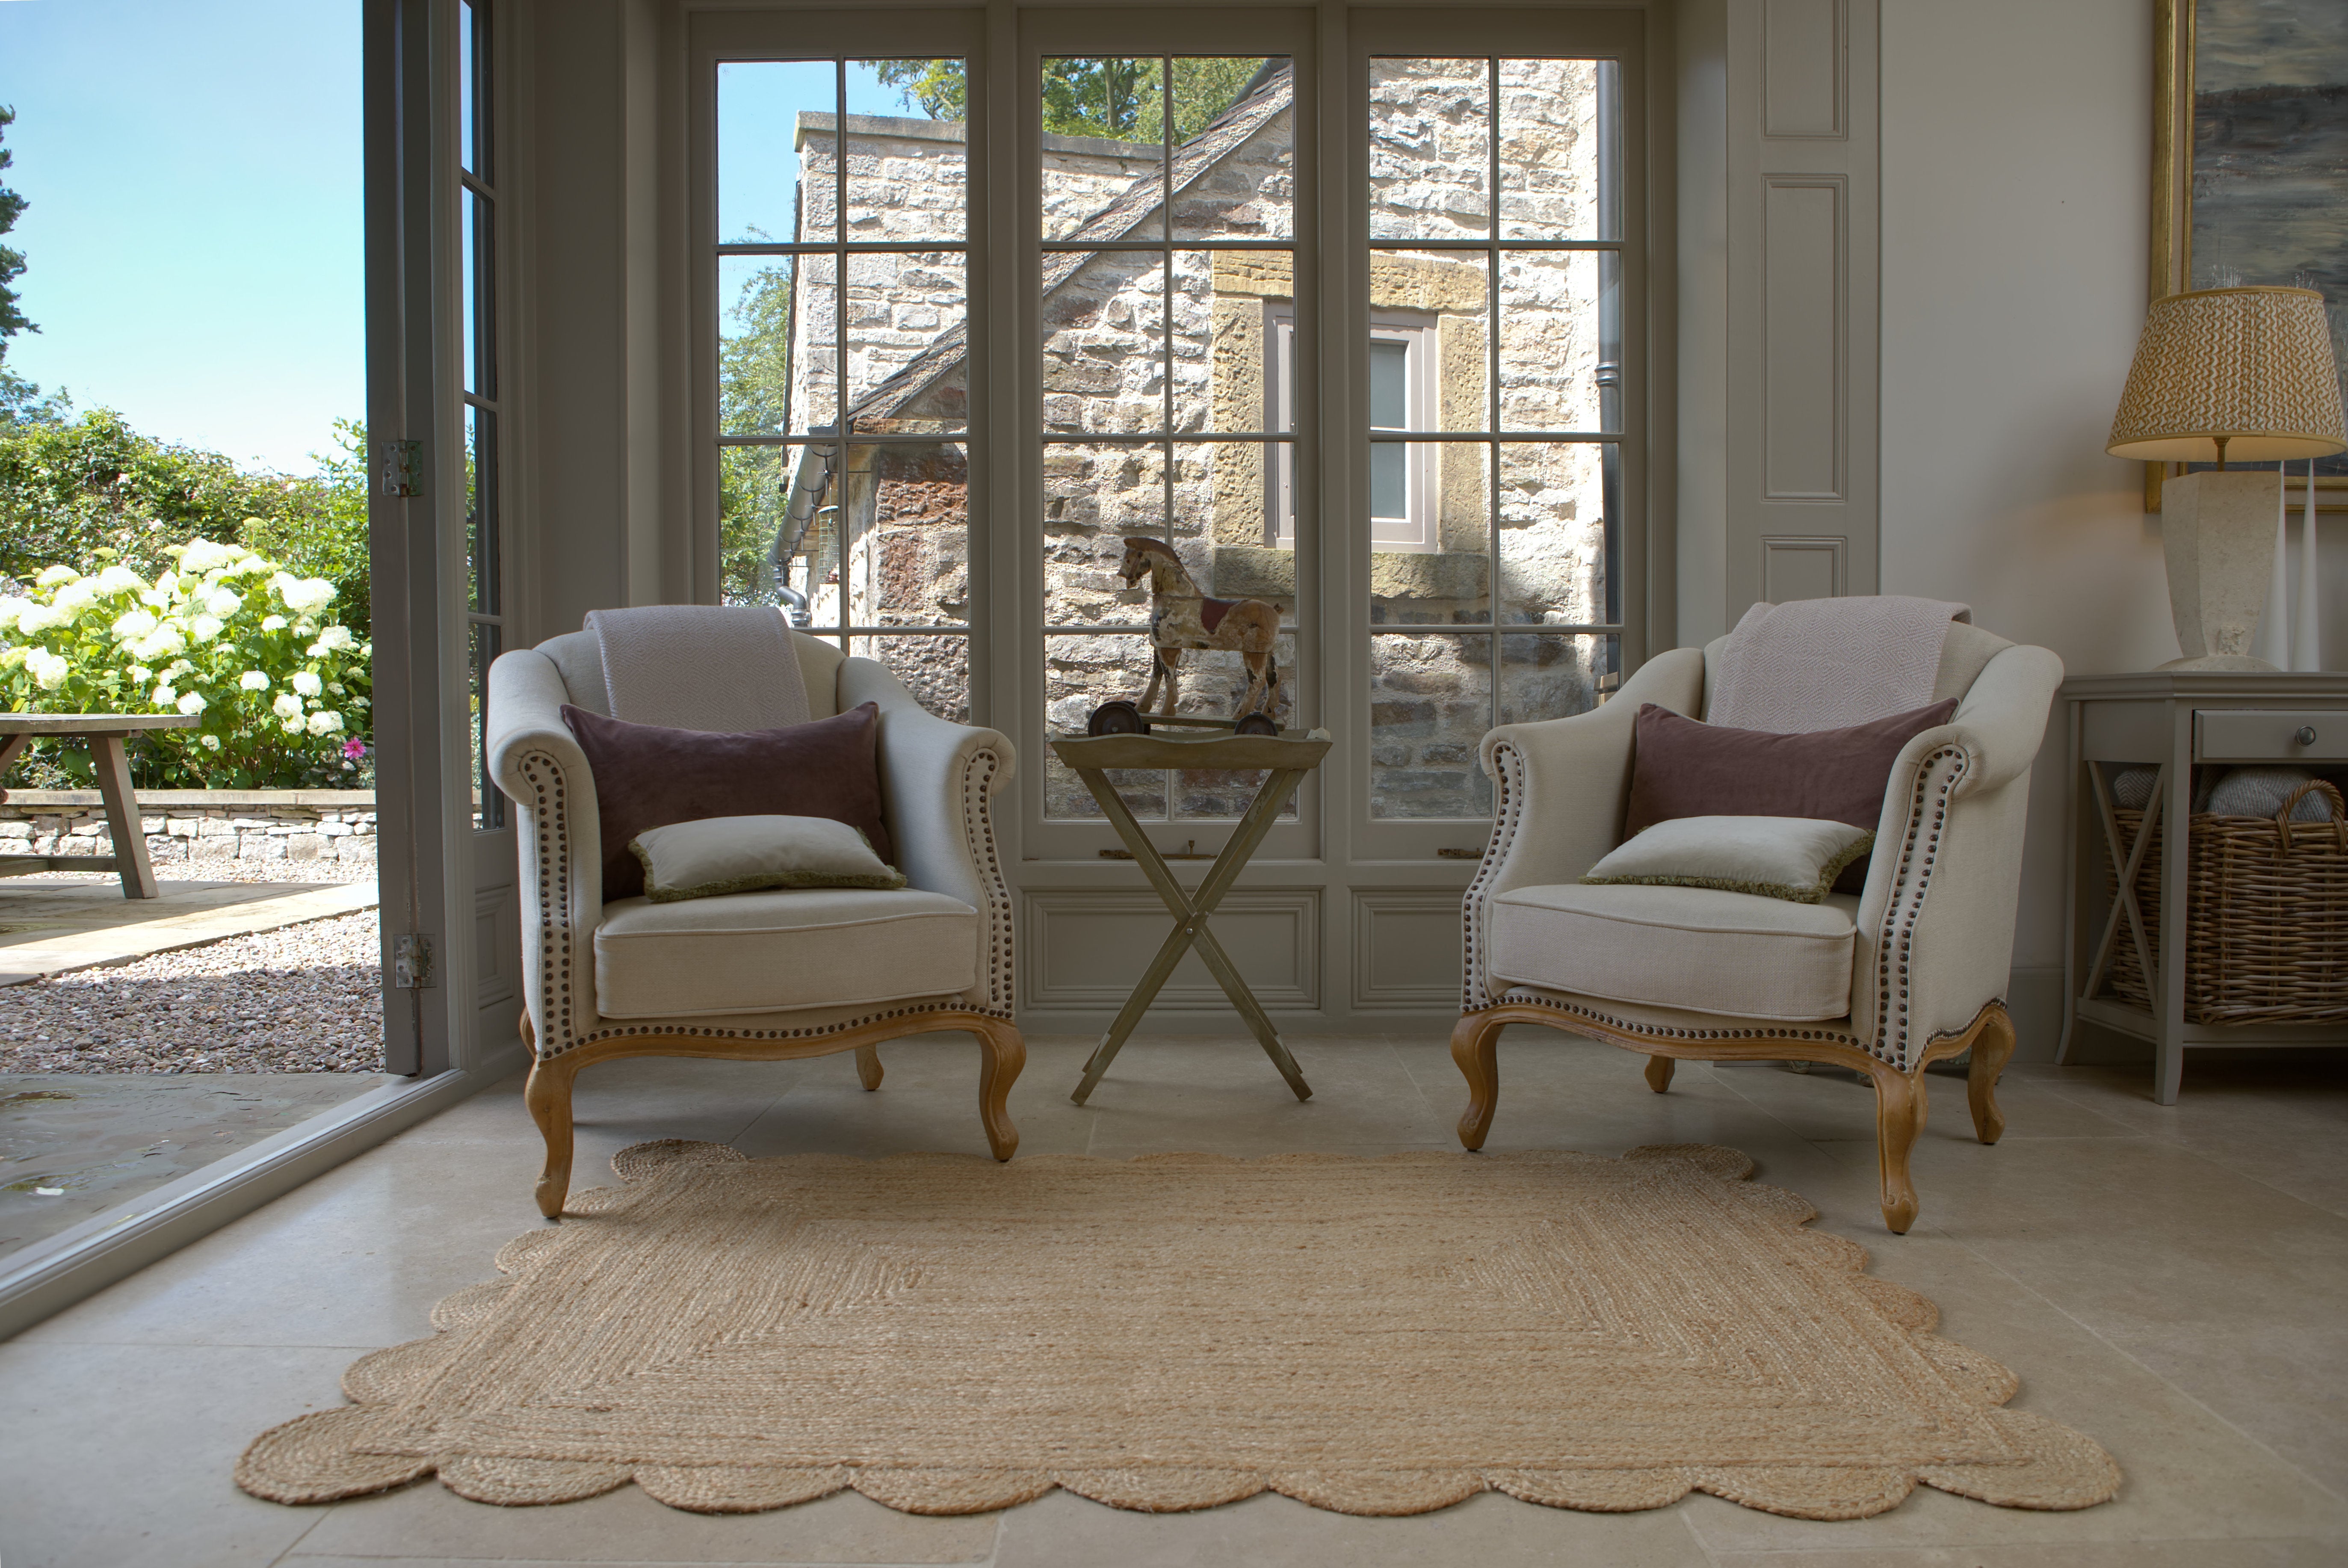 The Scallop Edge Natural Rug